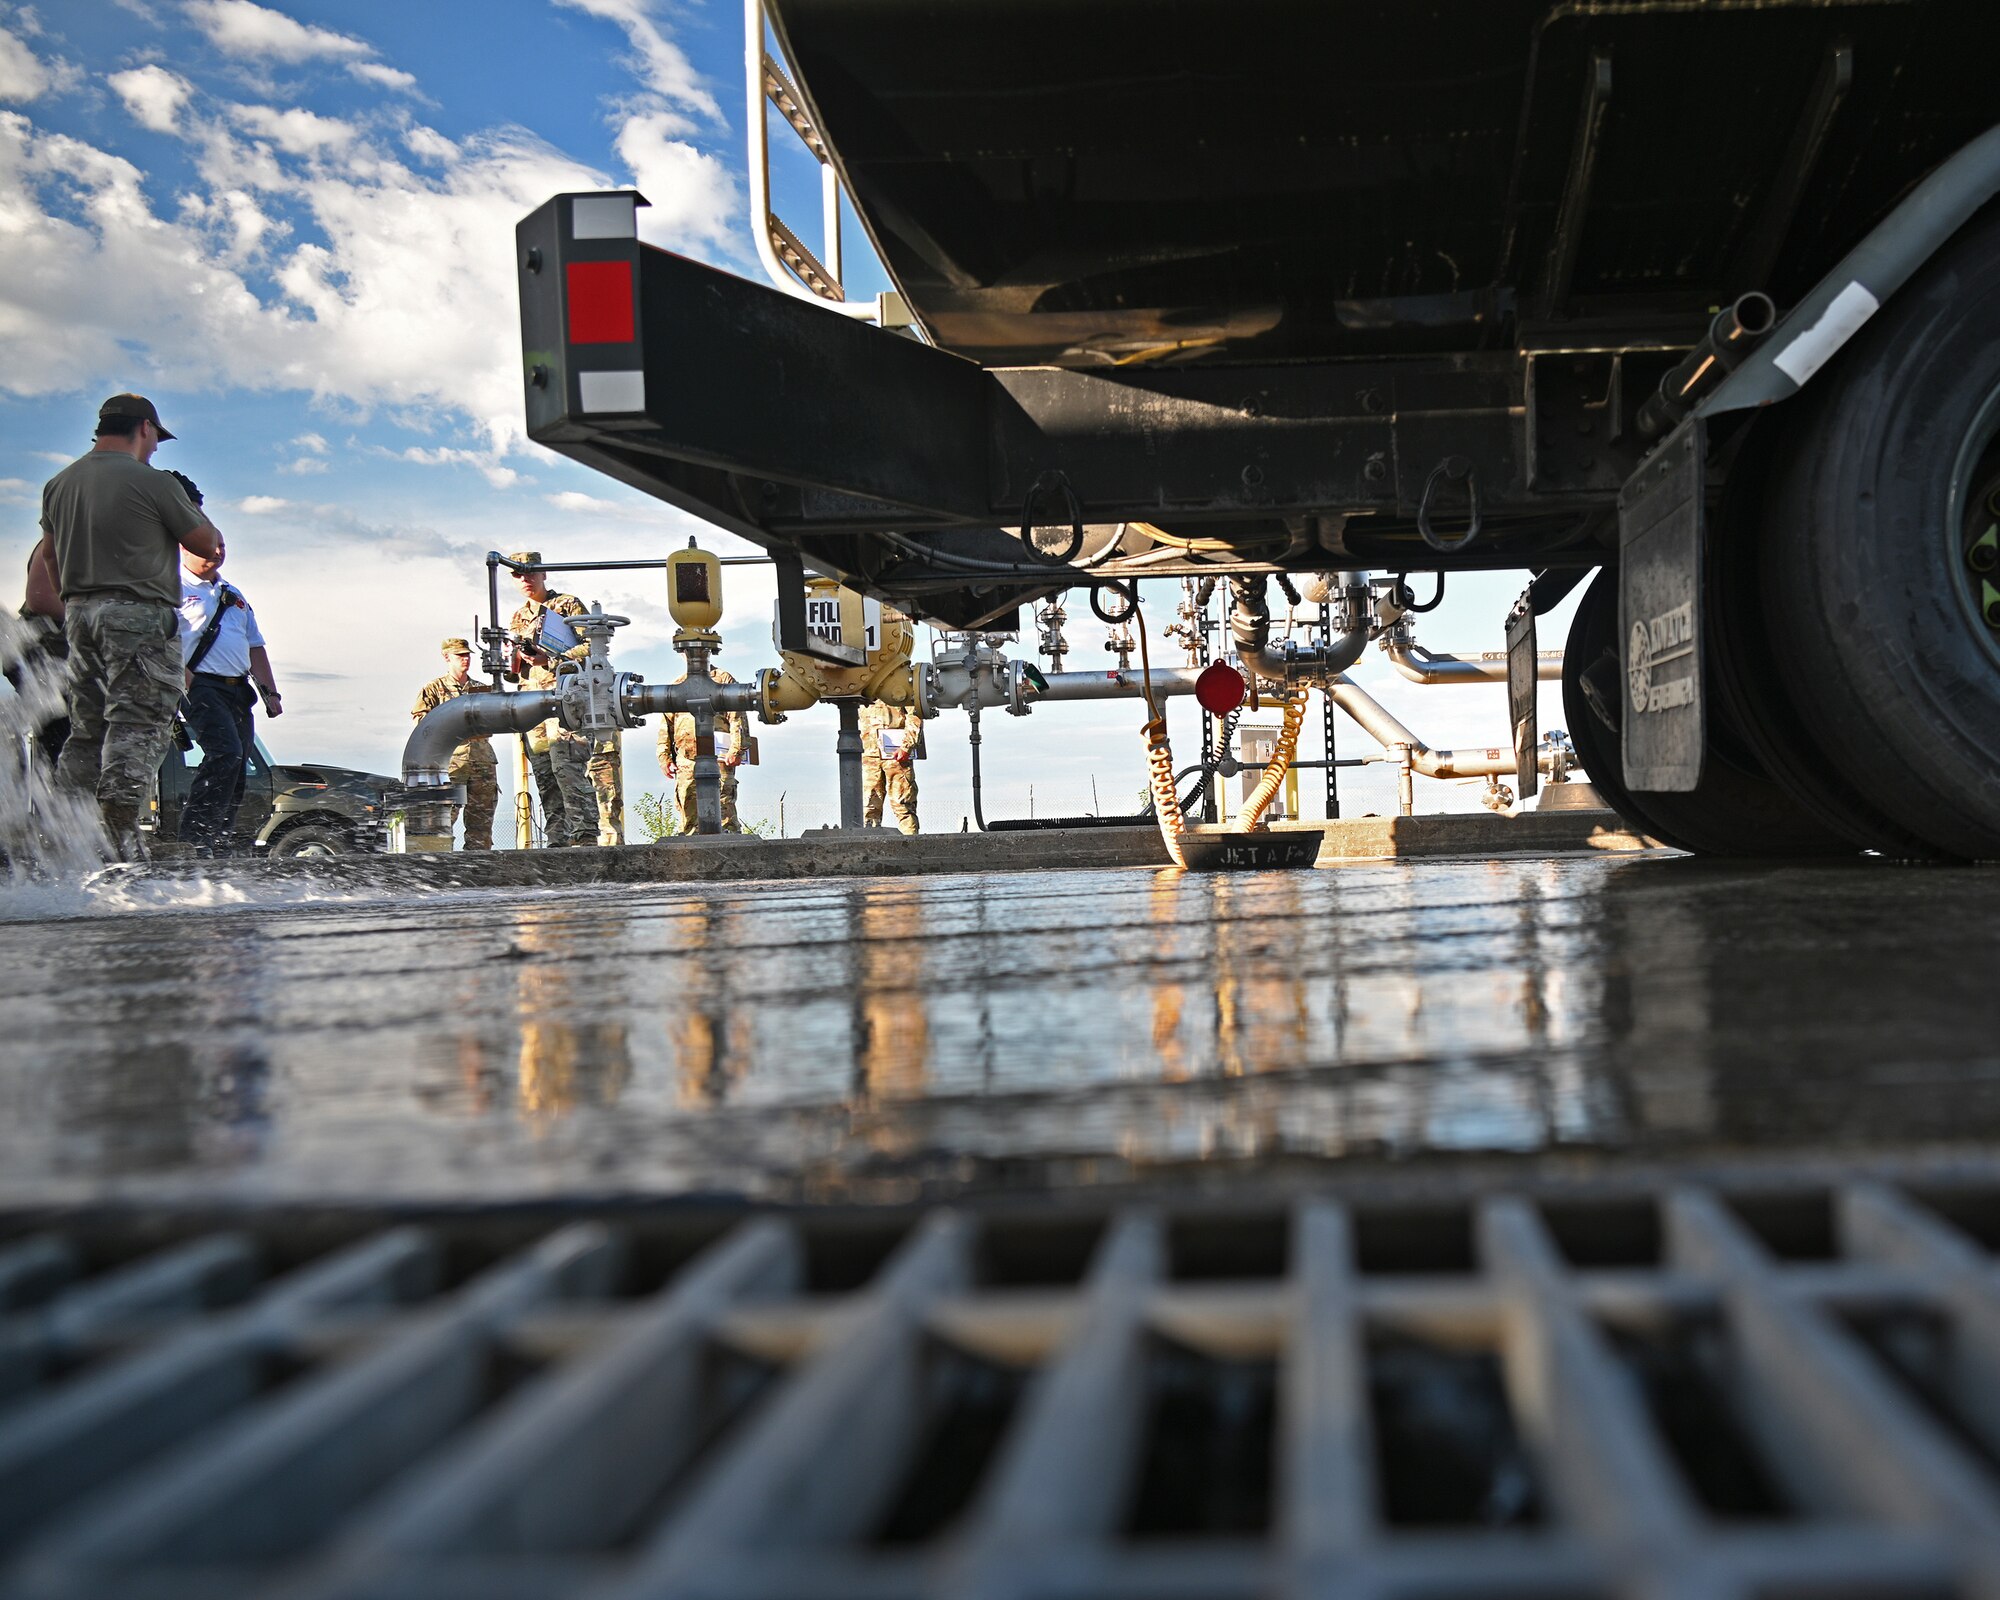 U.S. Air Force Staff Sgt. Jason Zabetakis, a fuels craftsman assigned to the 175th Mission Support Group, observes a simulated fuel spill during a Mission Assurance Exercise at Warfield Air National Guard Base at Martin State Airport, Middle River, Maryland, August 12, 2022.